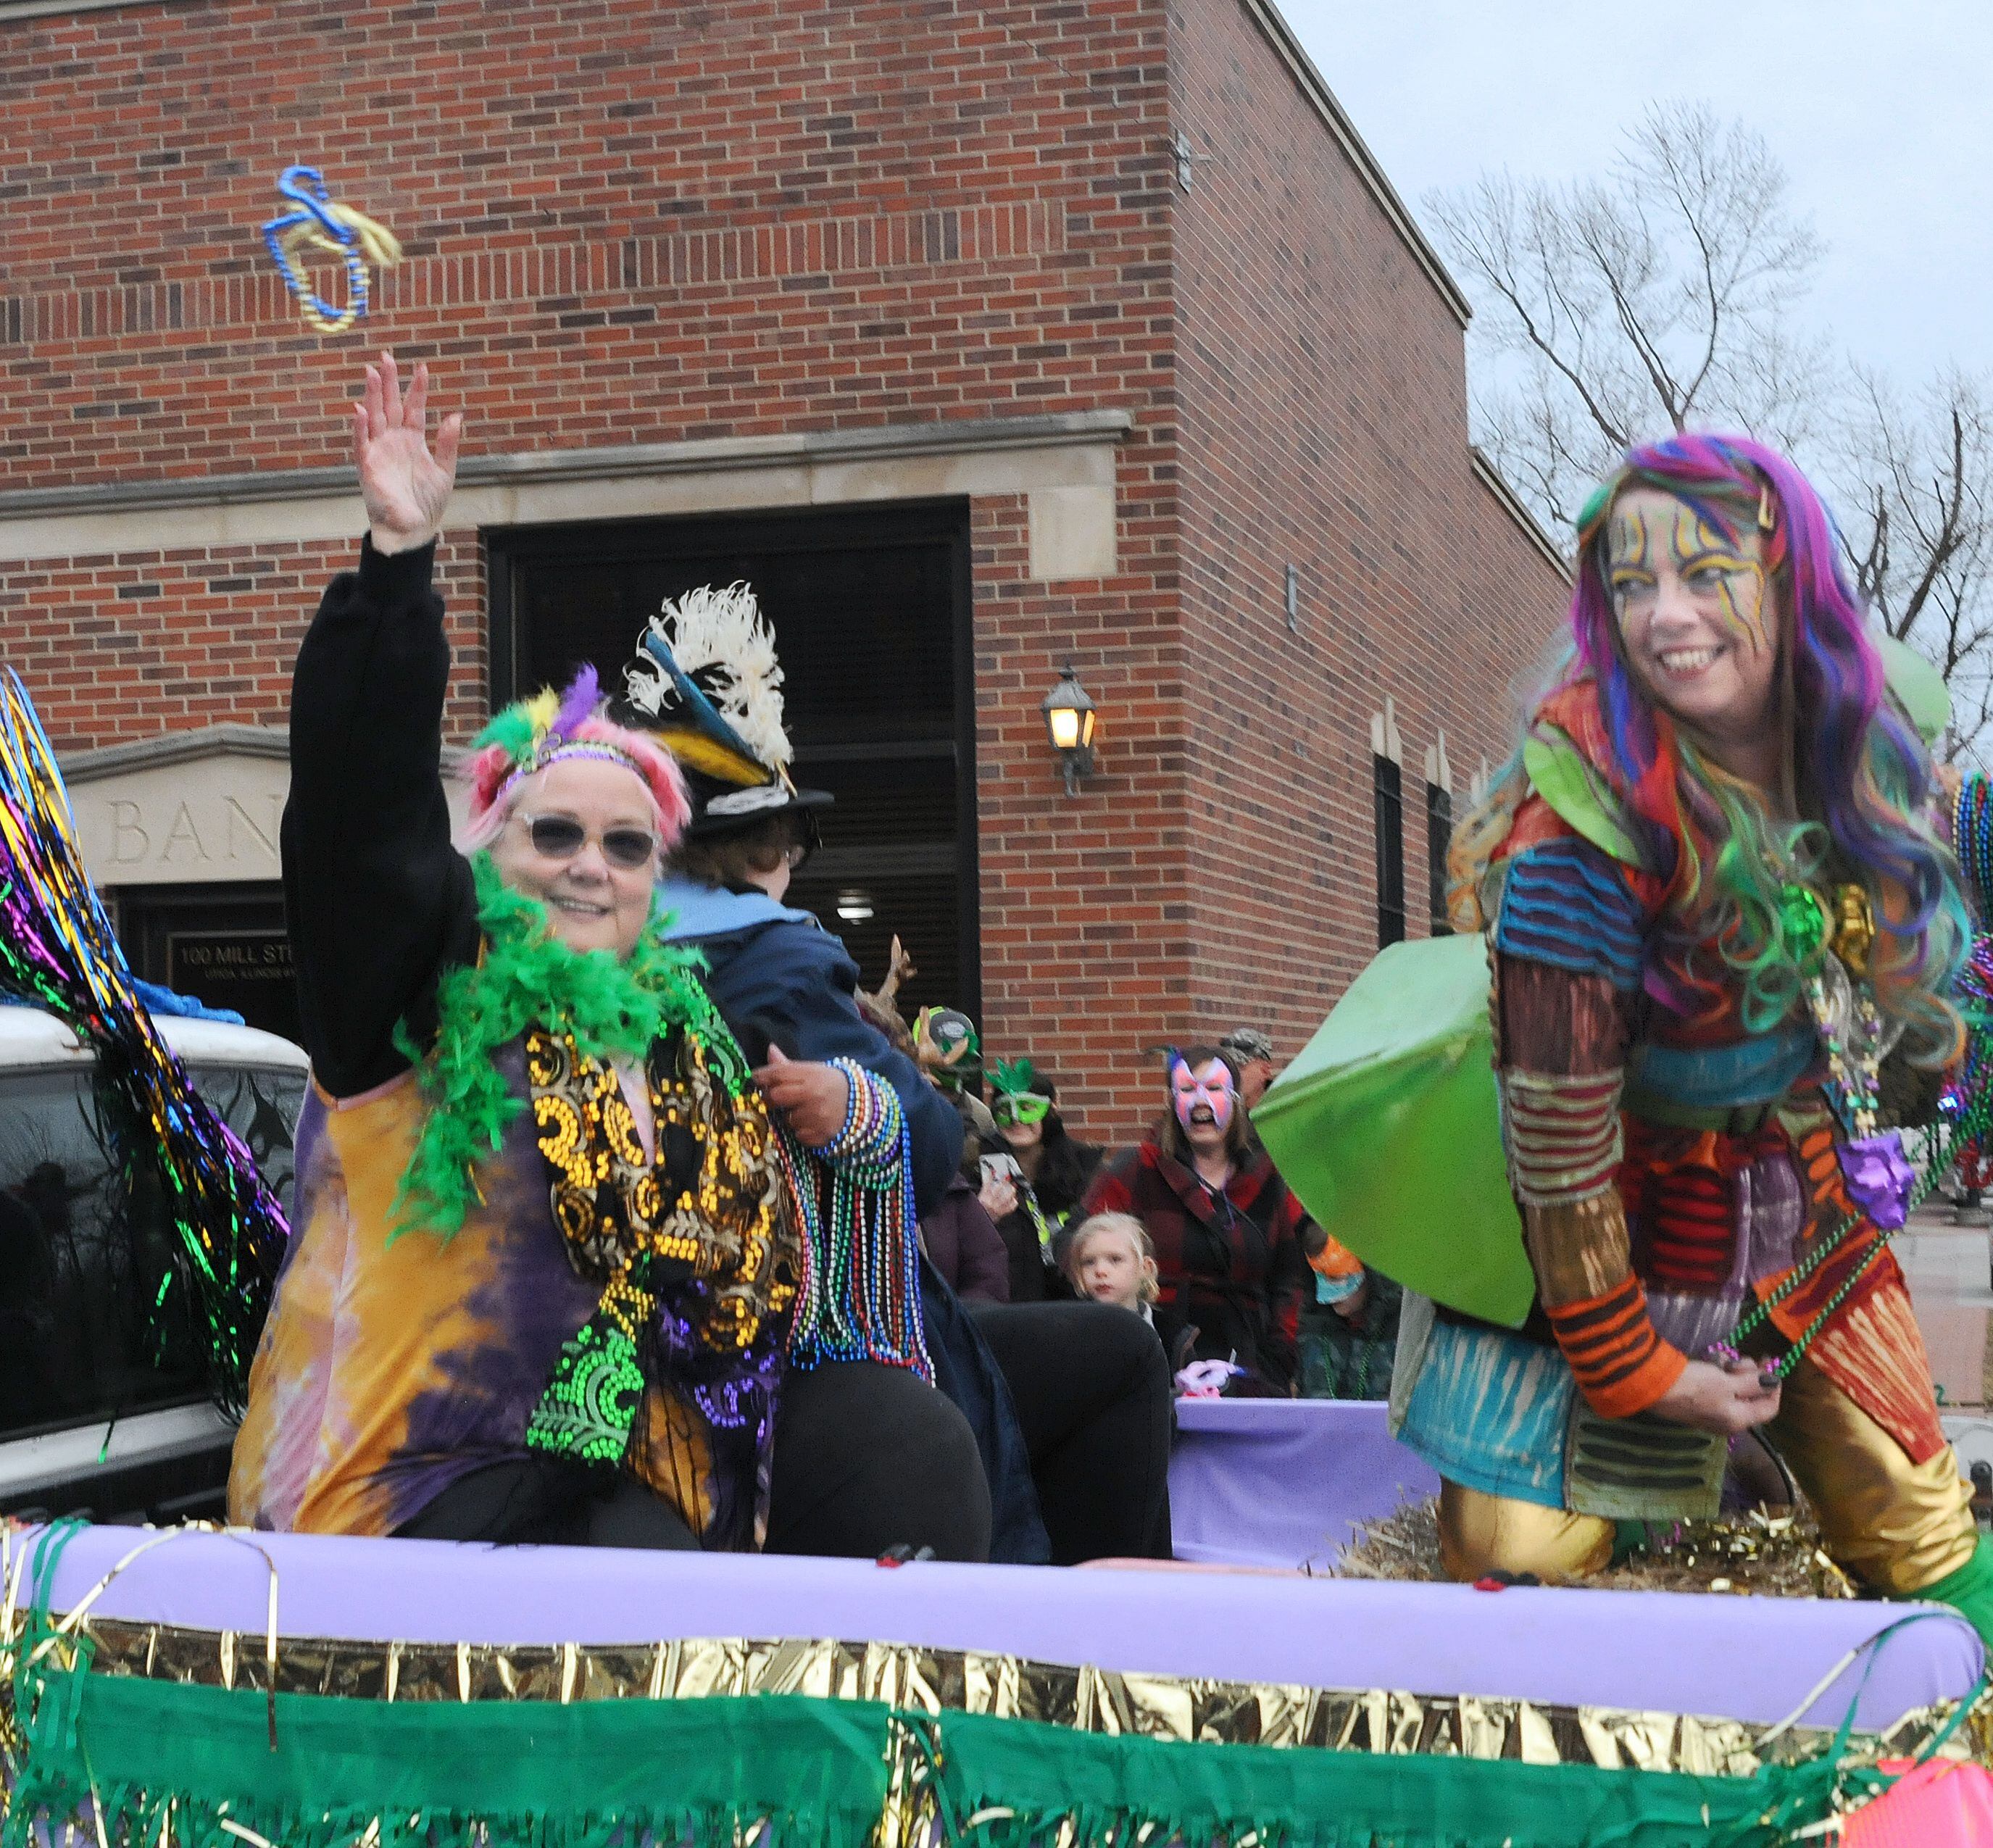 Mardi Gras revelers waited and received tokens and candy Saturday, Feb. 18, 2023, during the annual Mardi Gras parade in downtown Utica. The parade was sponsored by the Utica Business Association.